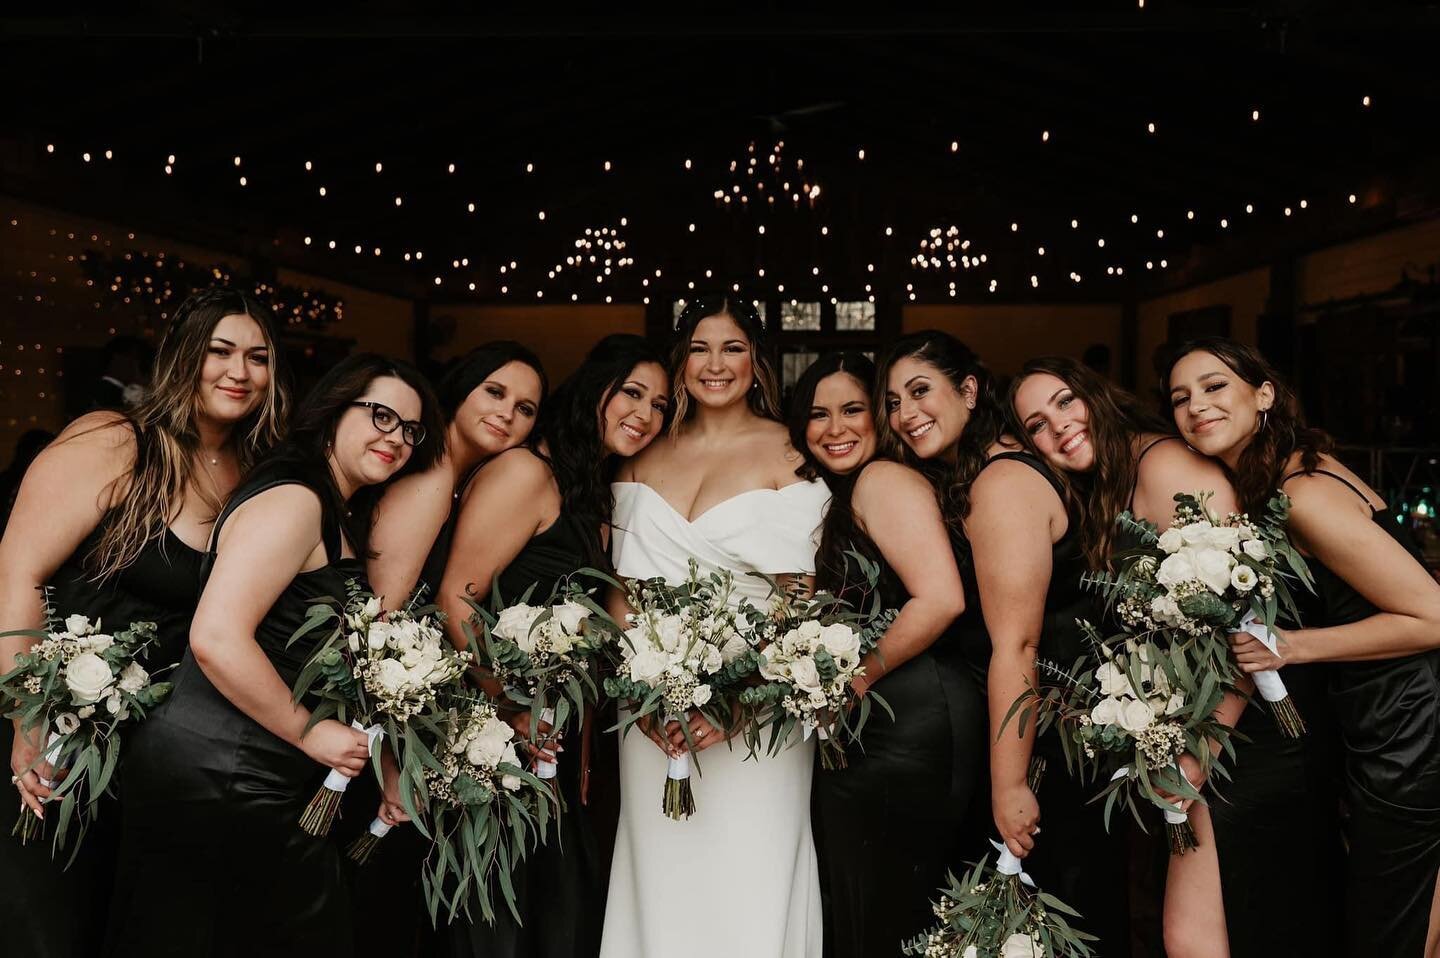 The most beautiful bridal party! Hair &amp;/or Makeup by Allure Hair Company!
📸: @meggydphotography